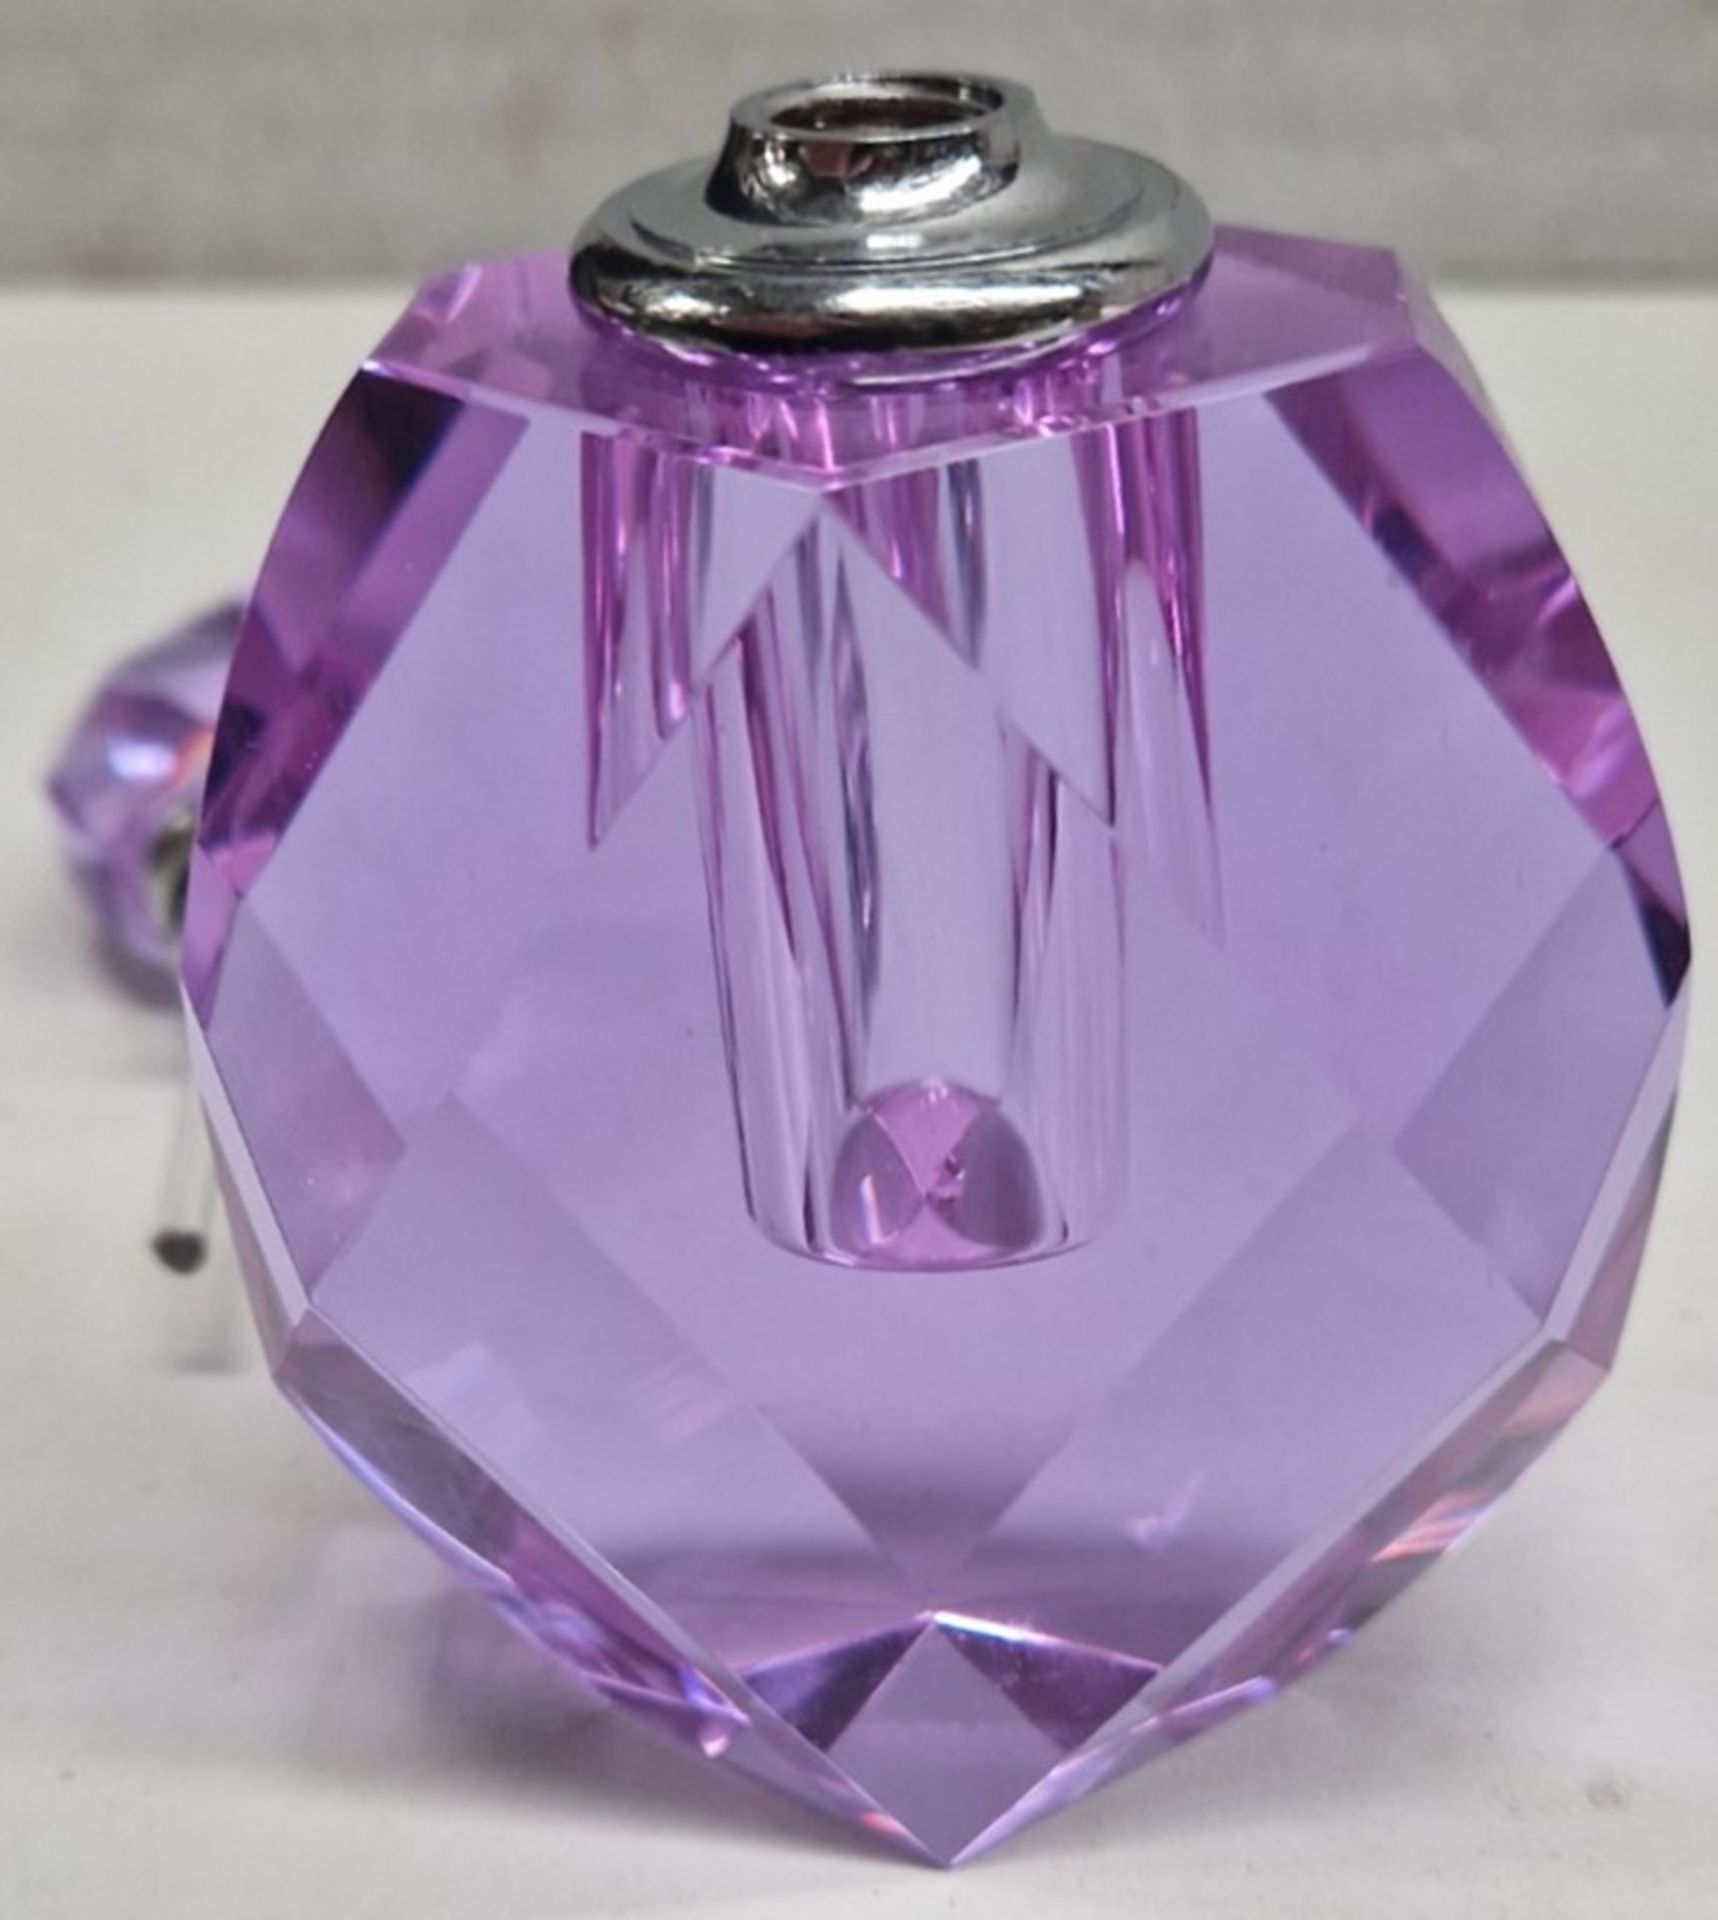 1 x Beautiful Purple Crystal Glass Perfume Bottle With Dauber And Threaded Stopper - Image 4 of 6